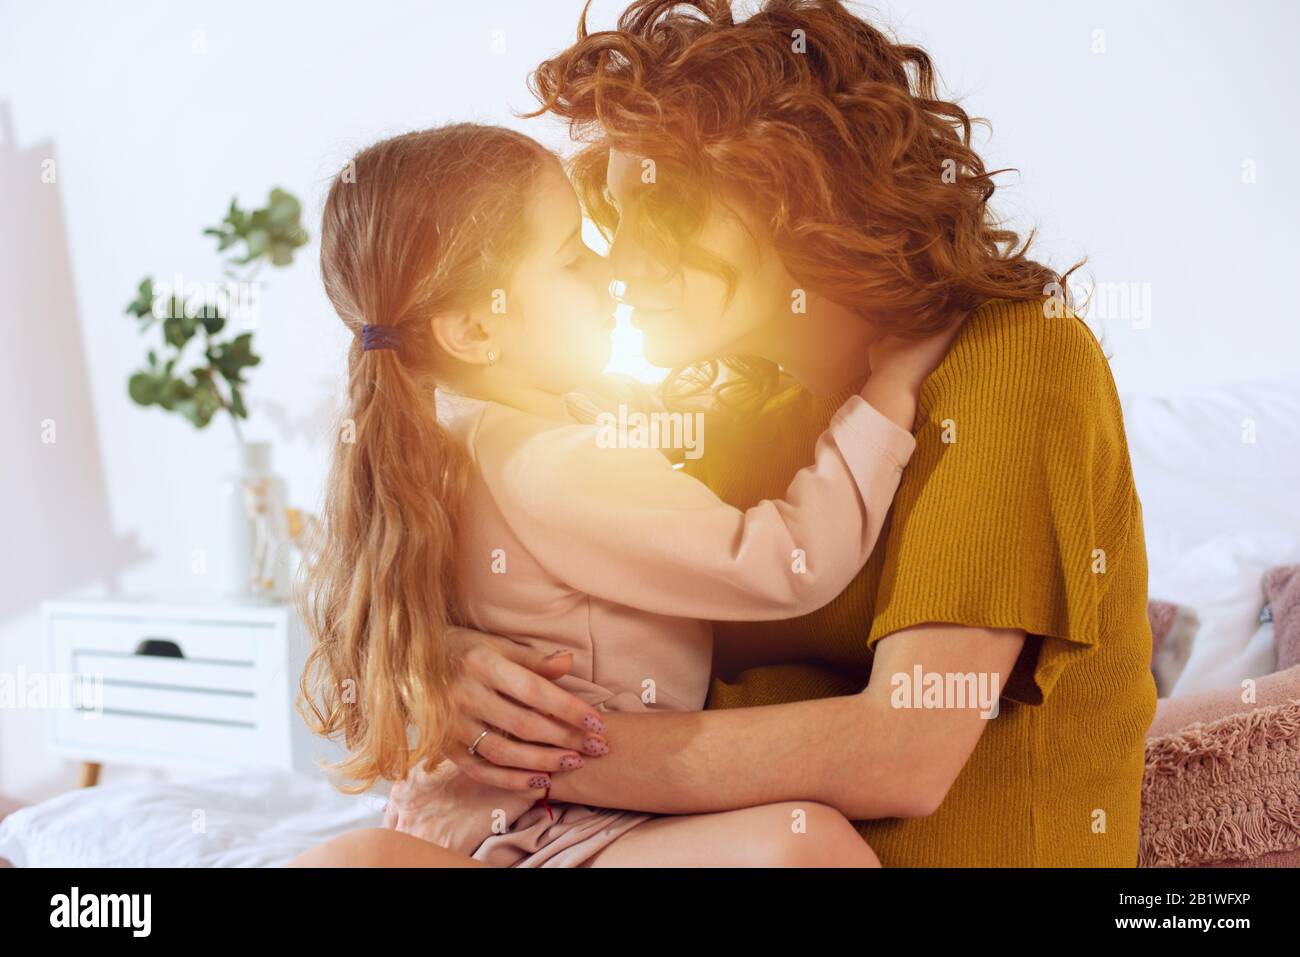 Pregnant mom plays with her daughter. Concept of family, joy and pregnancy Stock Photo